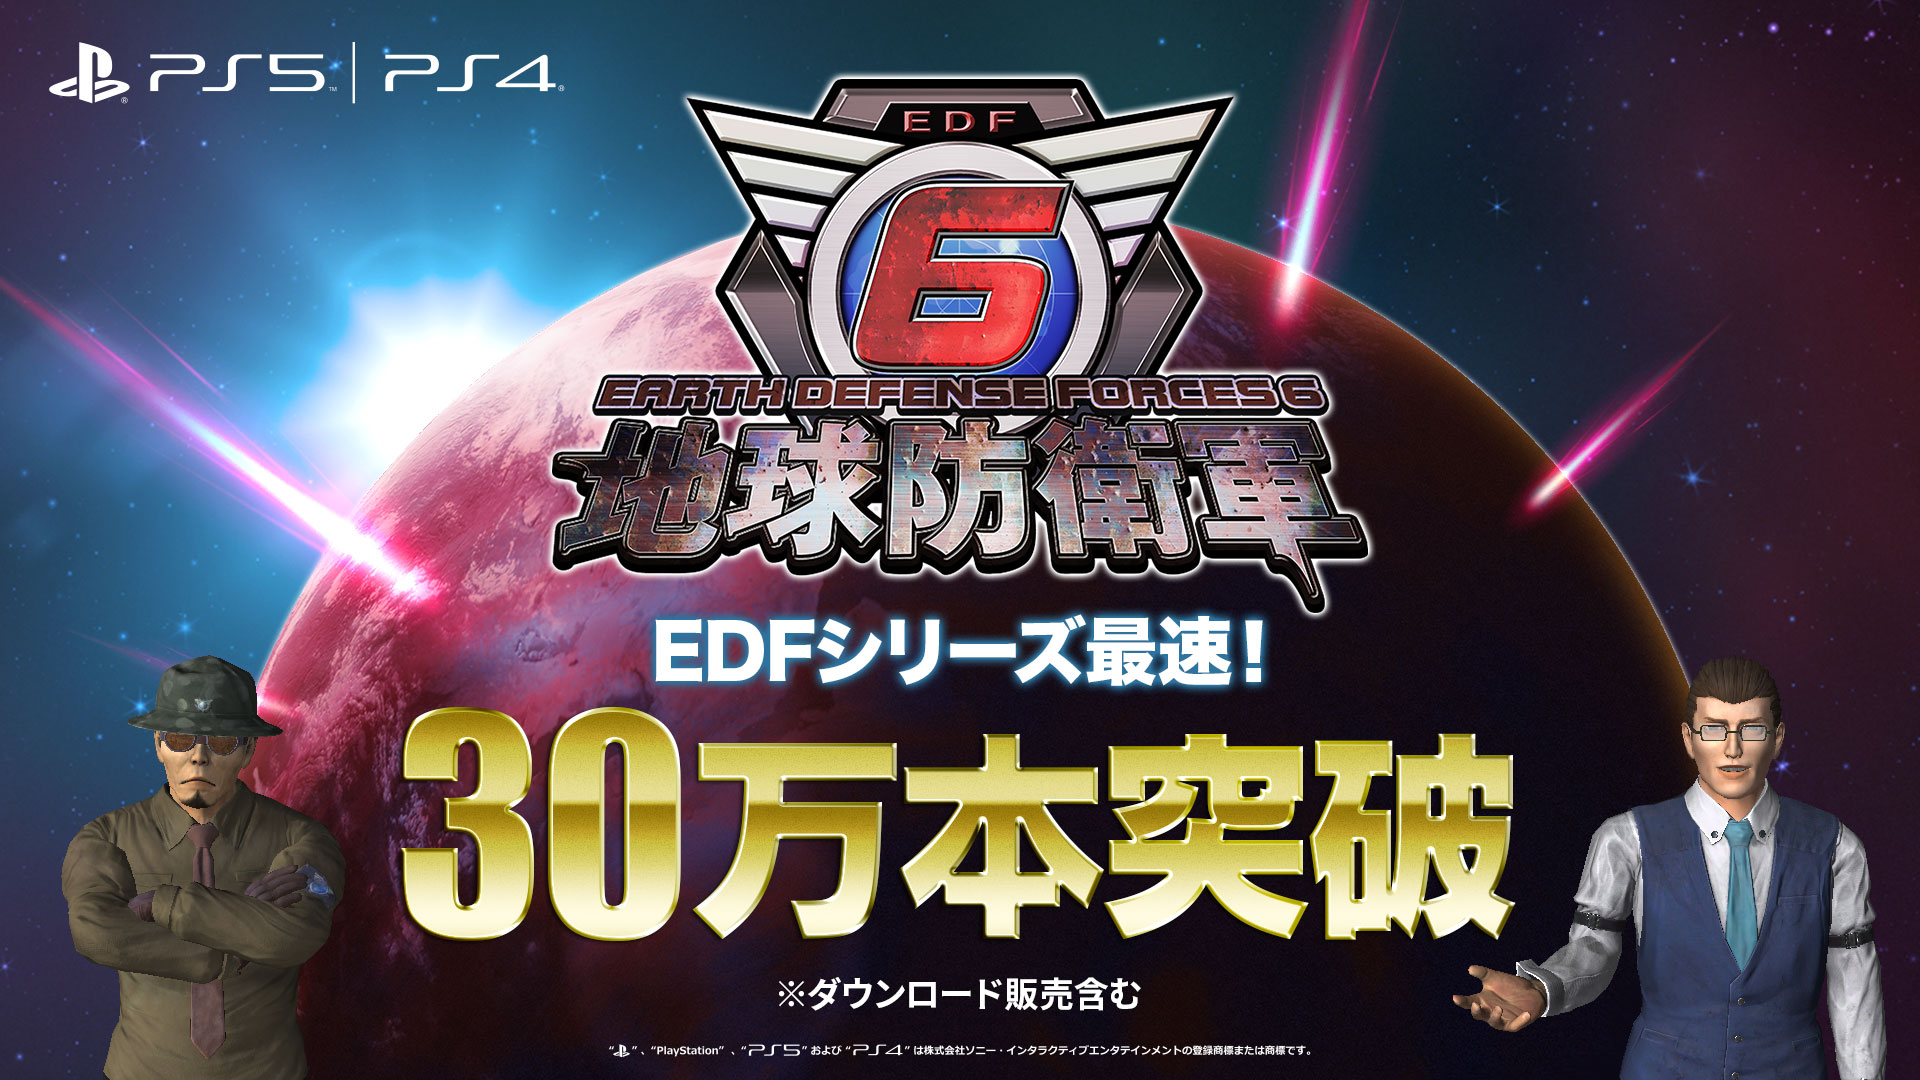 #
      Earth Defense Force 6 shipments and digital sales top 300,000 within first week of release